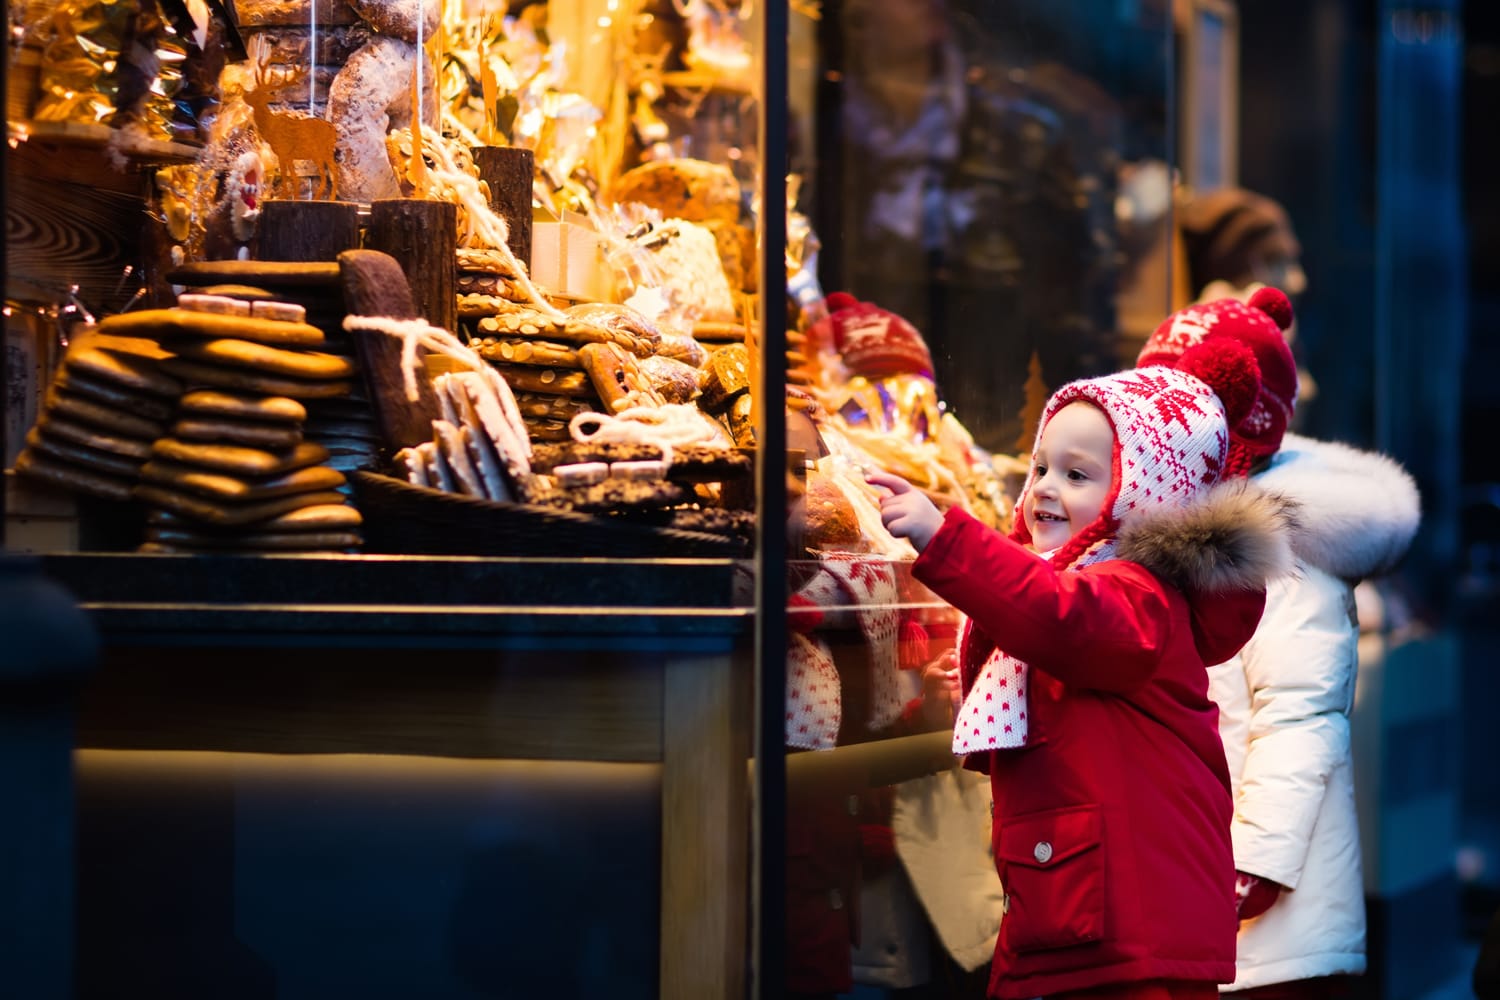 Children window shopping on traditional Christmas market in Germany on snowy winter day